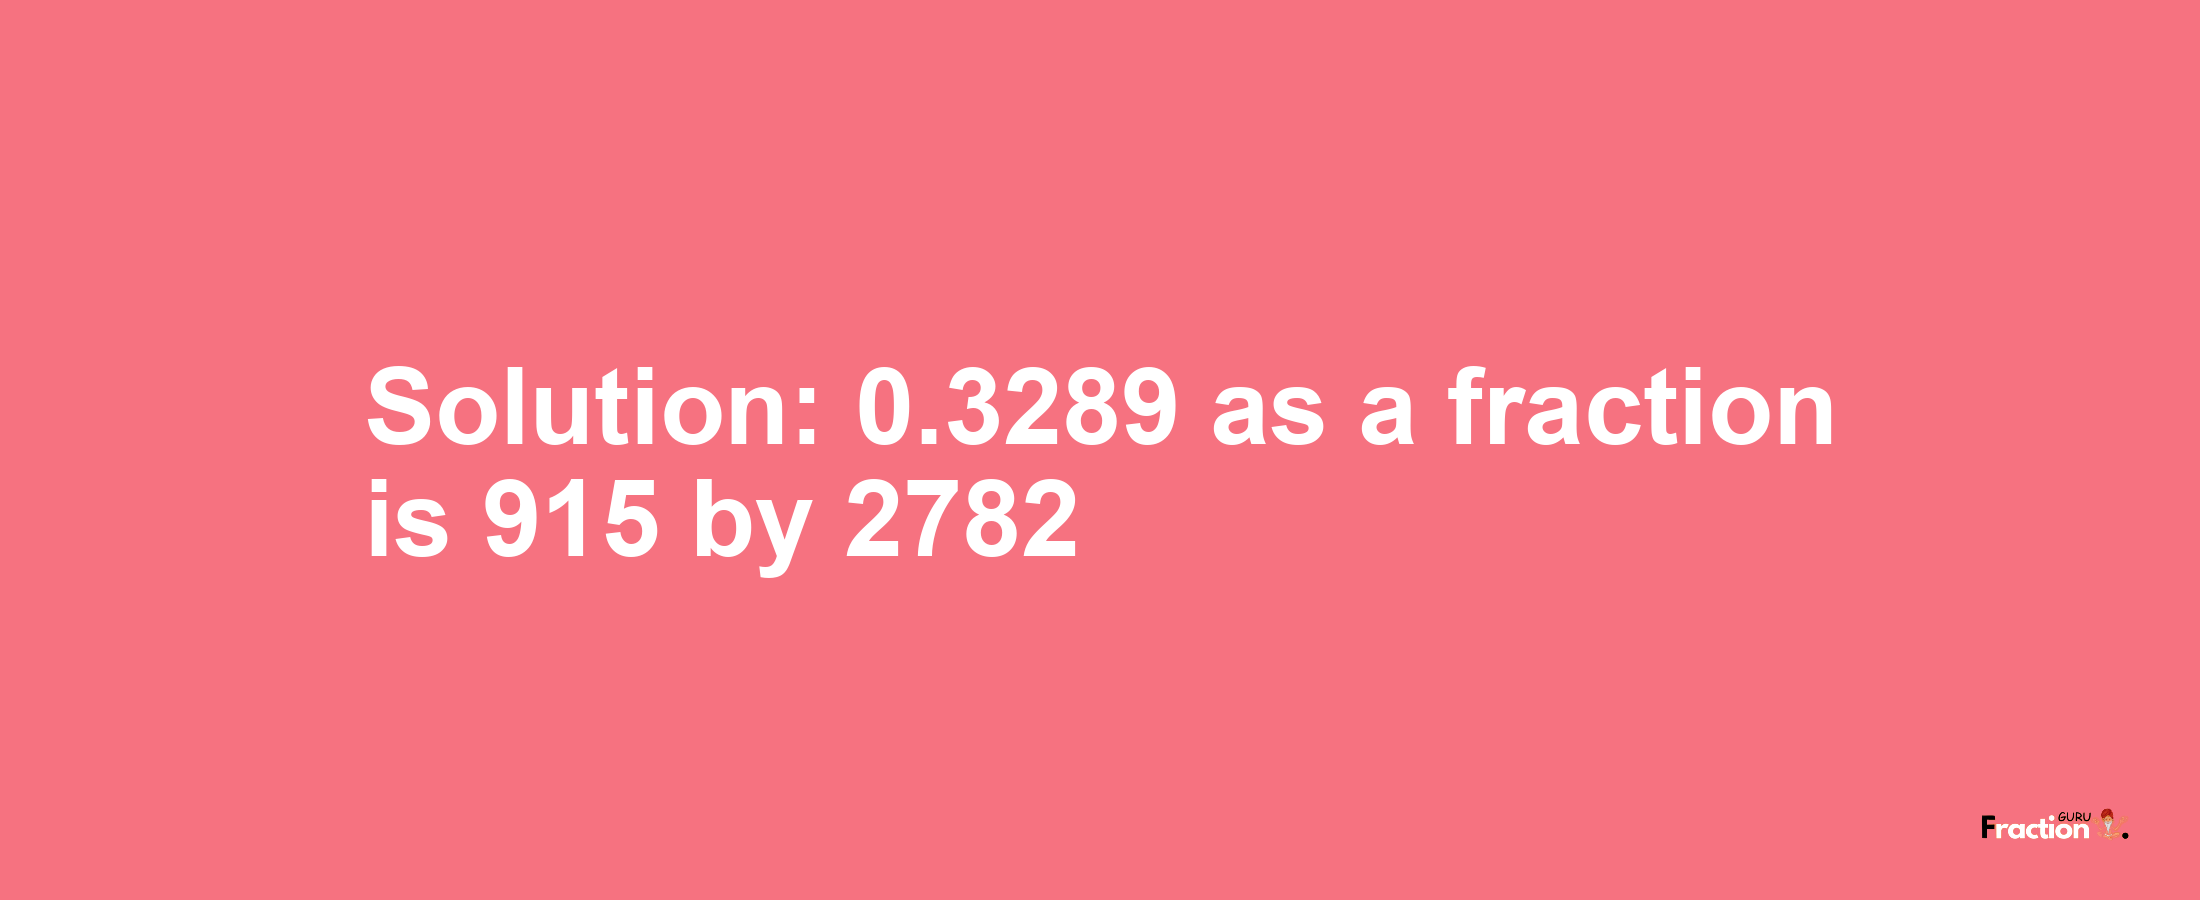 Solution:0.3289 as a fraction is 915/2782